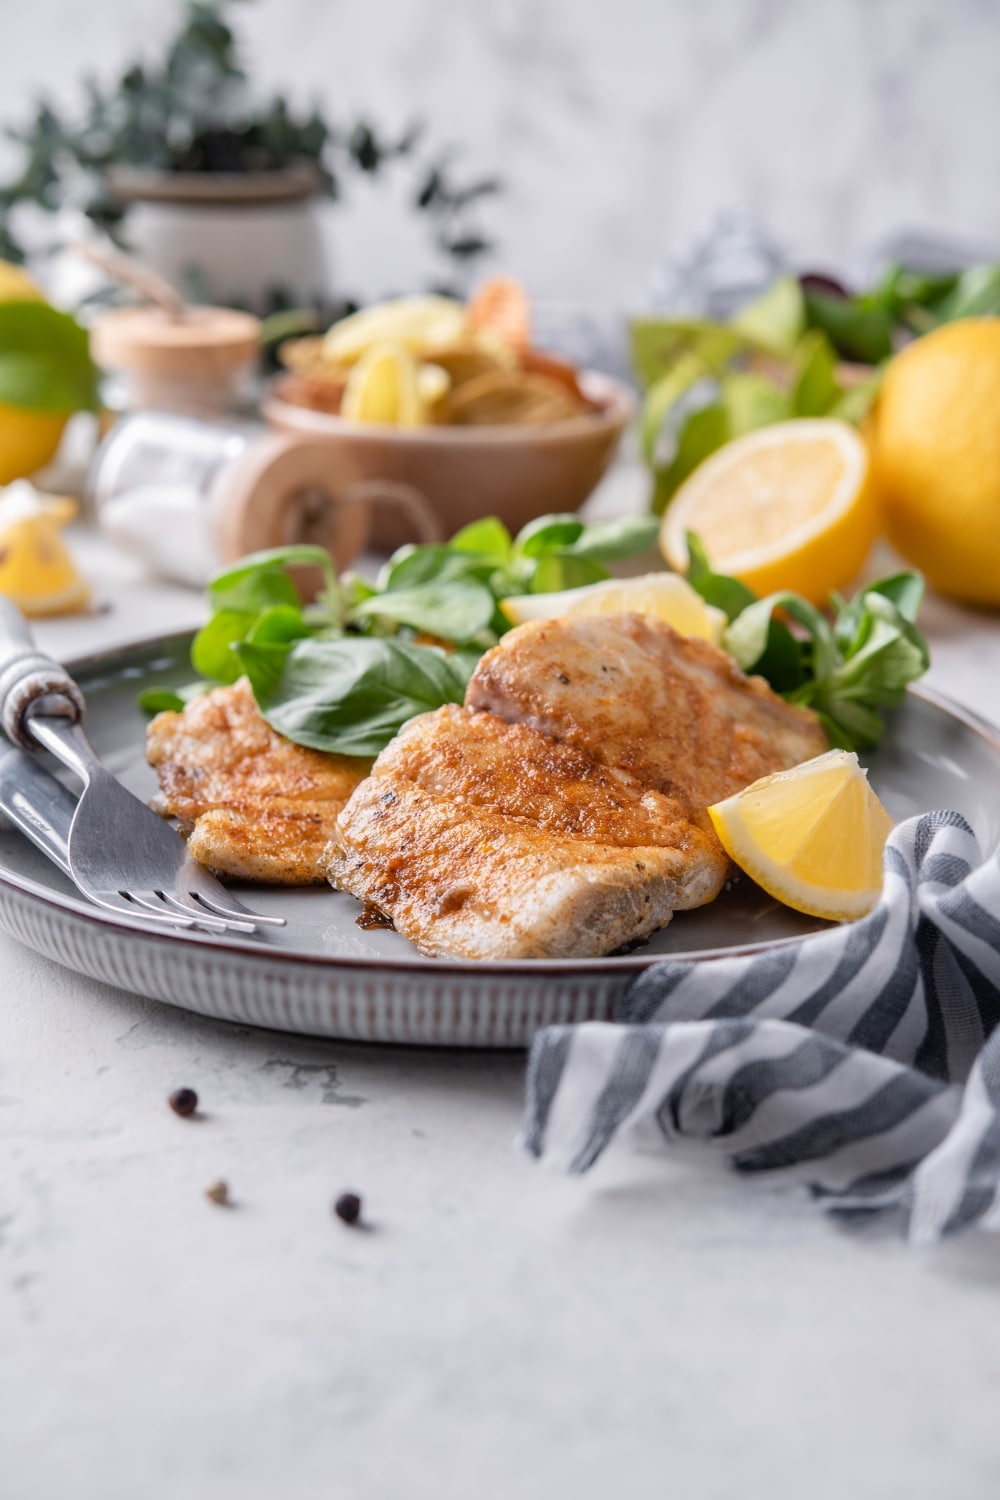 Two grilled halibut filets served with salad and lemon wedges on a grey plate.